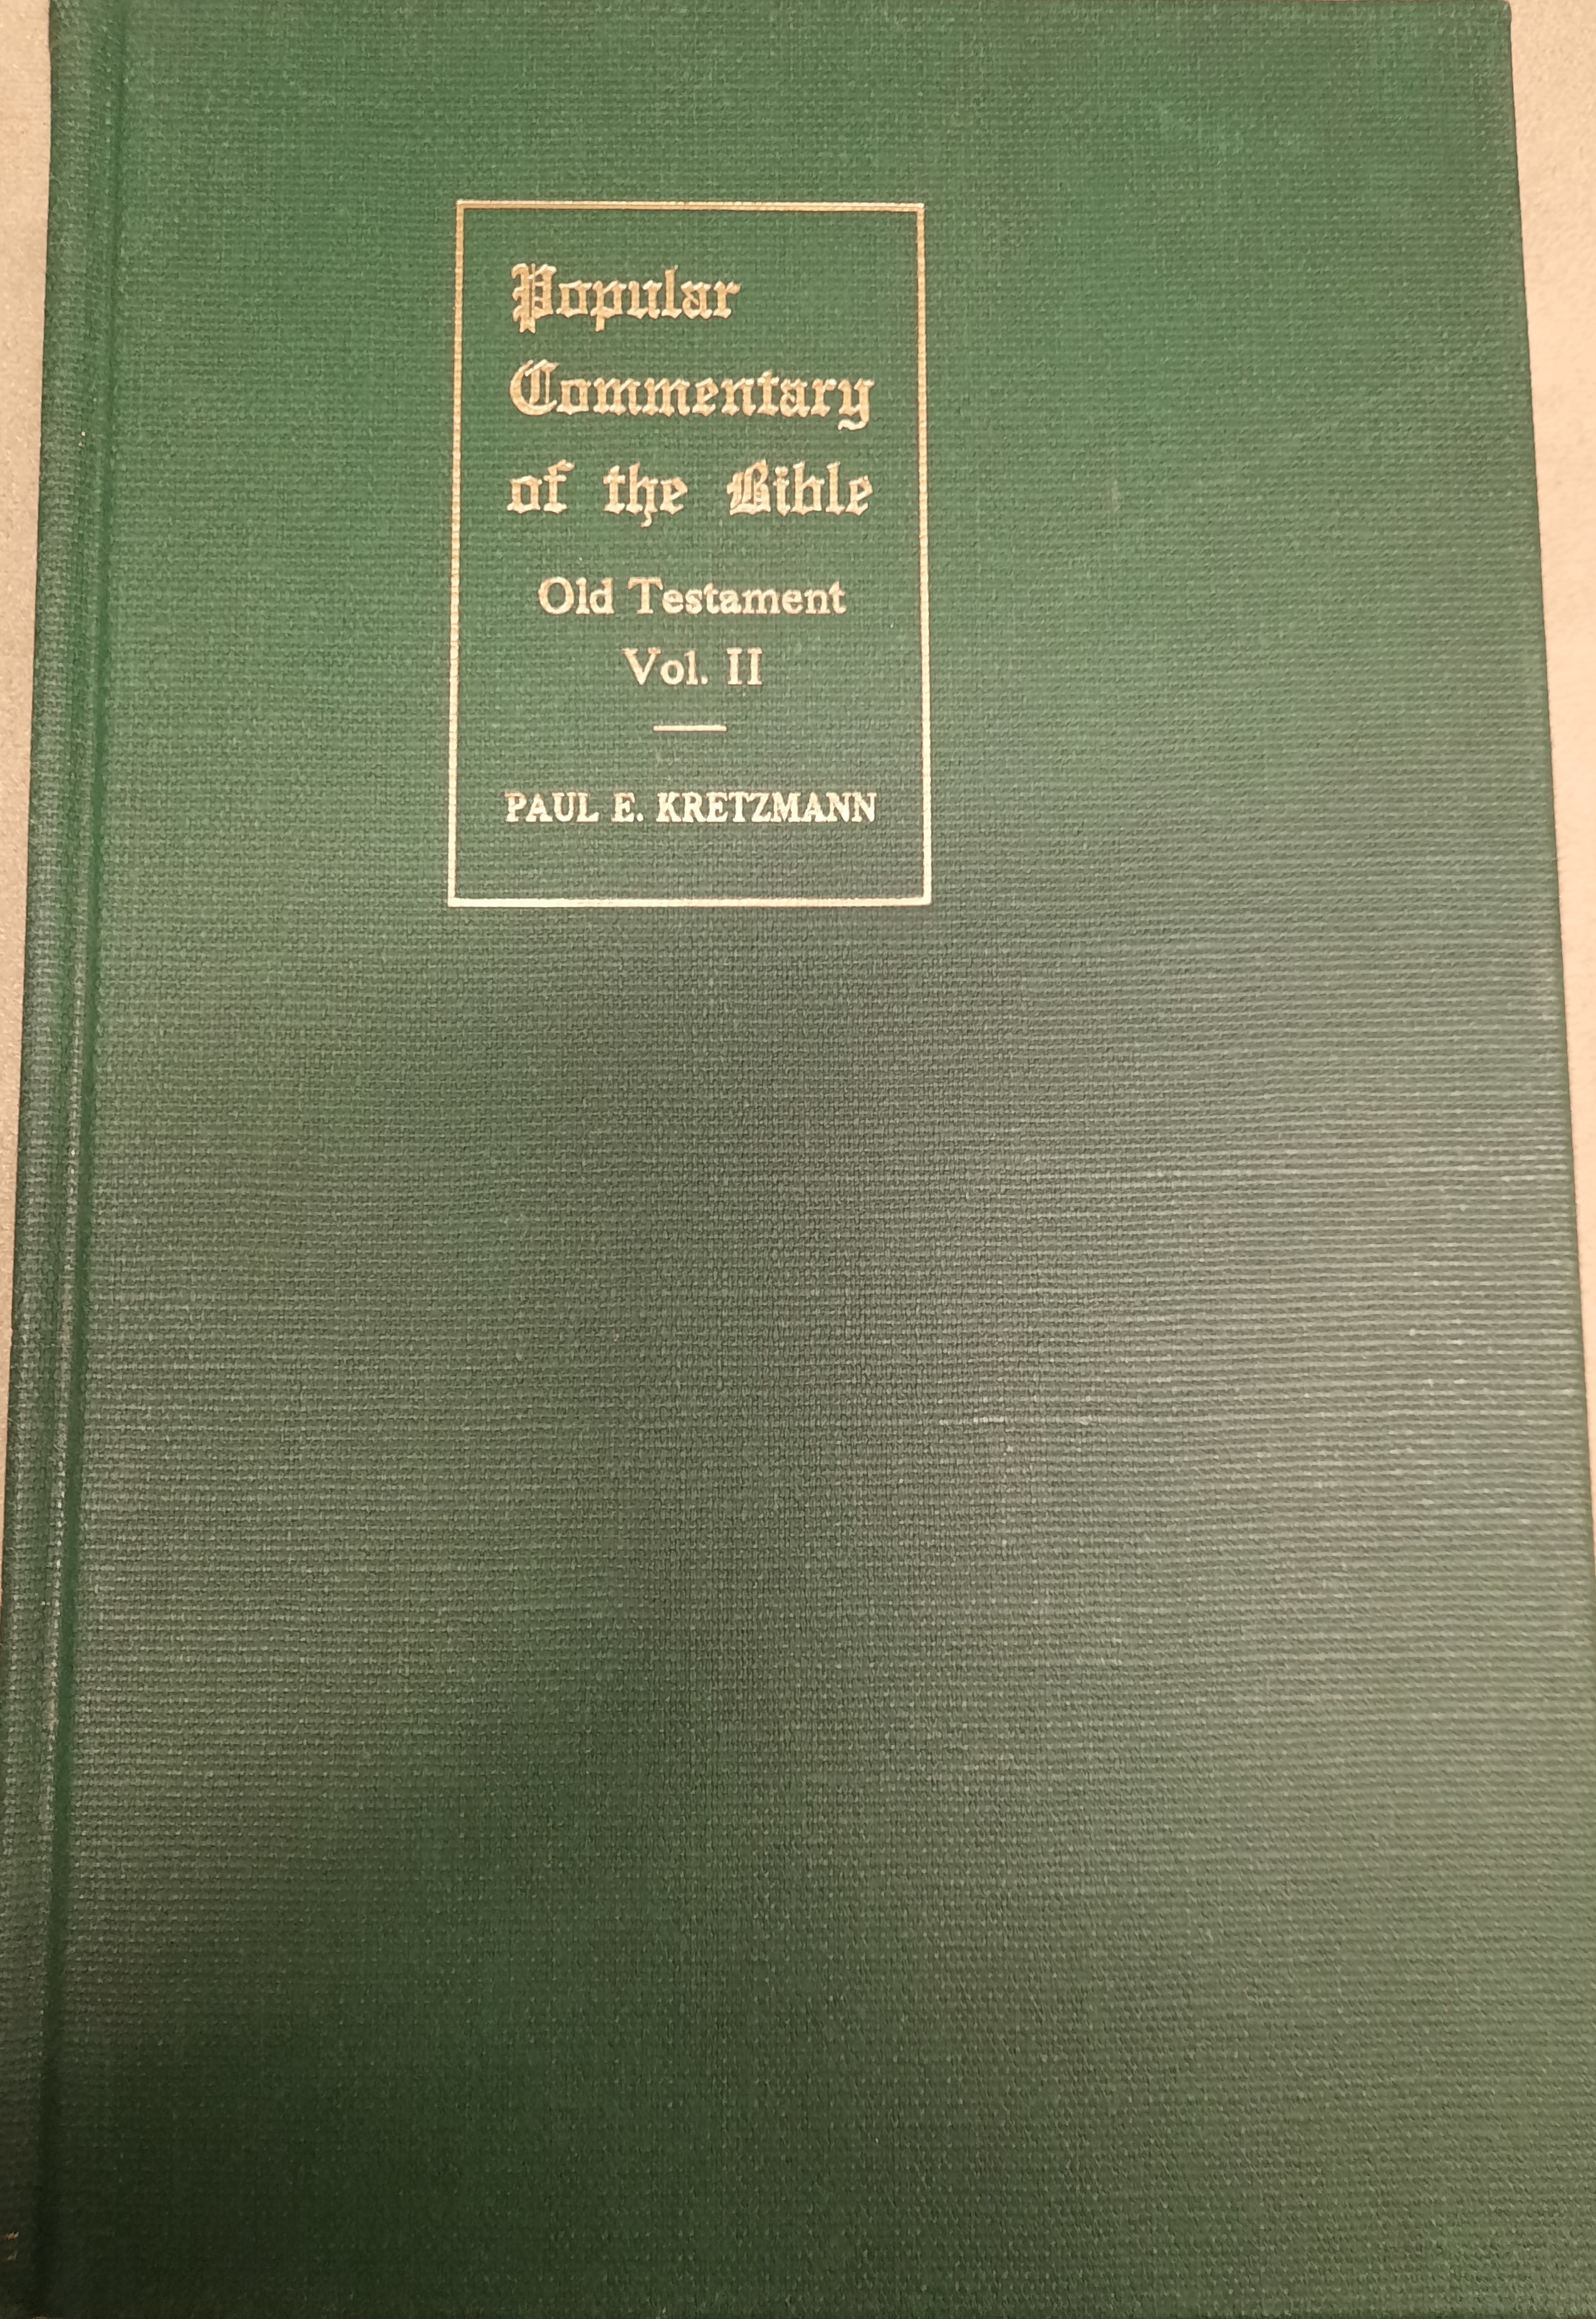 Popular Commentary of the Bible Old Testament Vol II